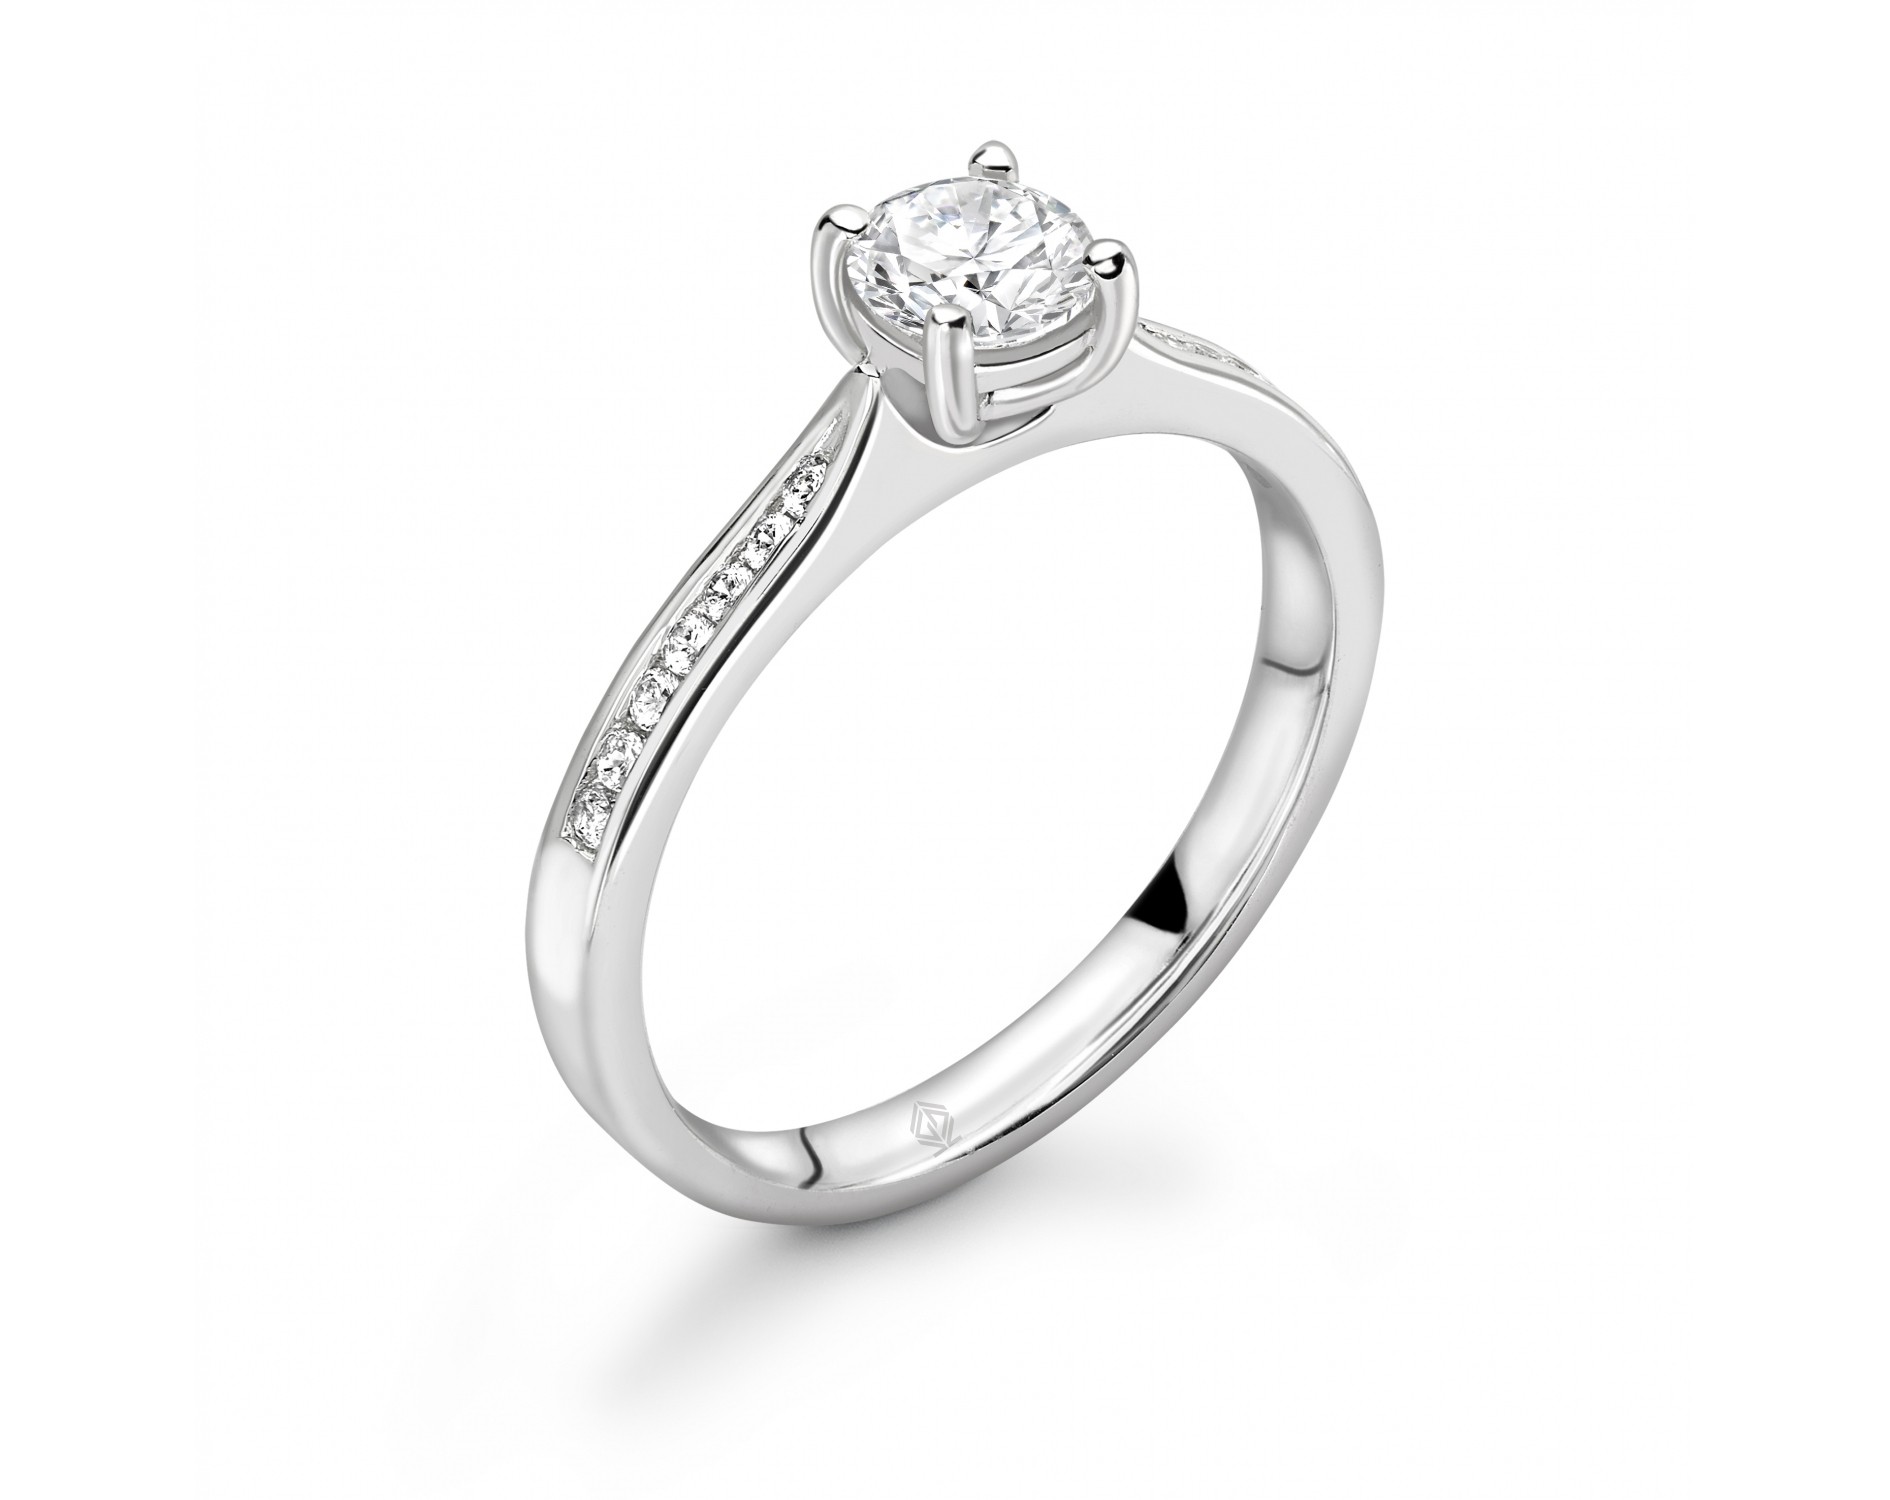 18K WHITE GOLD 4 PRONGS ROUND DIAMOND ENGAGEMENT RING WITH SIDE STONES CHANNEL SET